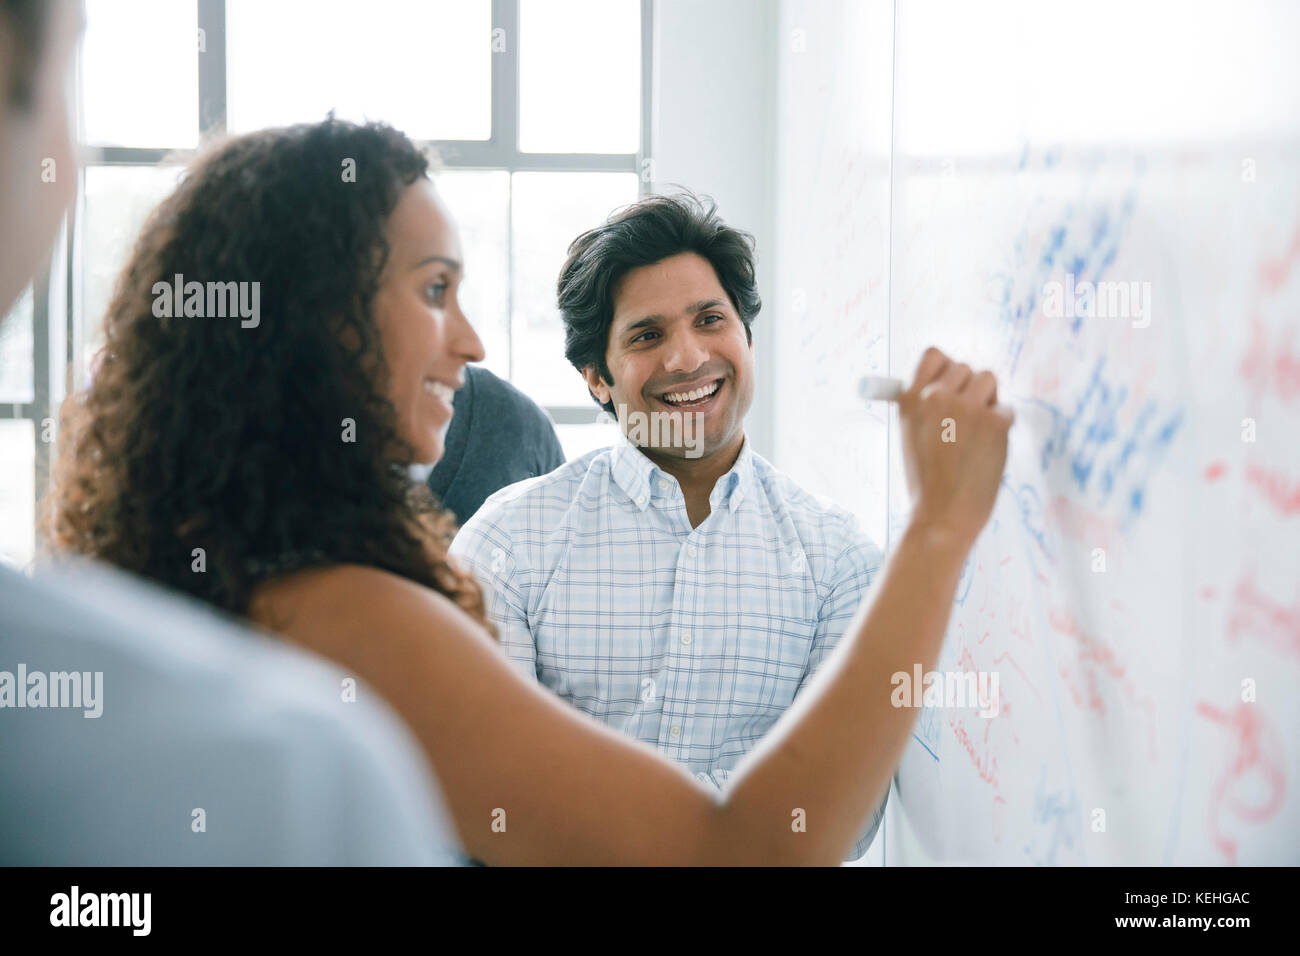 Businesswoman writing on whiteboard in meeting Stock Photo